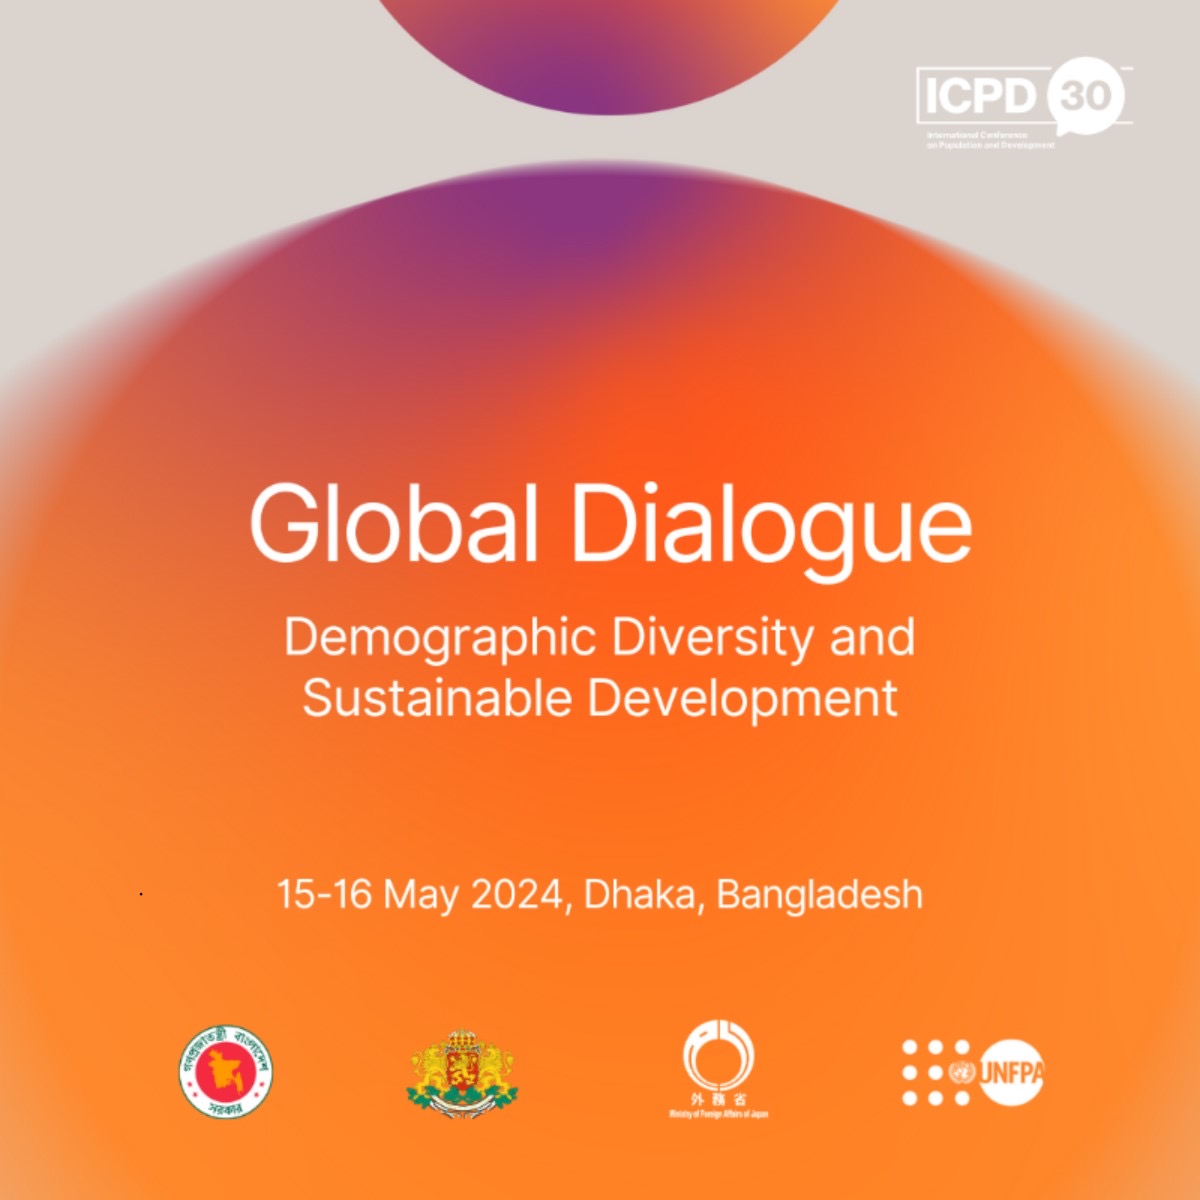 Delegates will meet in #Bangladesh this week to discuss the world’s shifting demographics. Follow the #ICPD30 Global Dialogue on Demographic Diversity and Sustainable Development to see why #OurCommonFuture relies on rights and choices: unf.pa/ddd #GlobalGoals